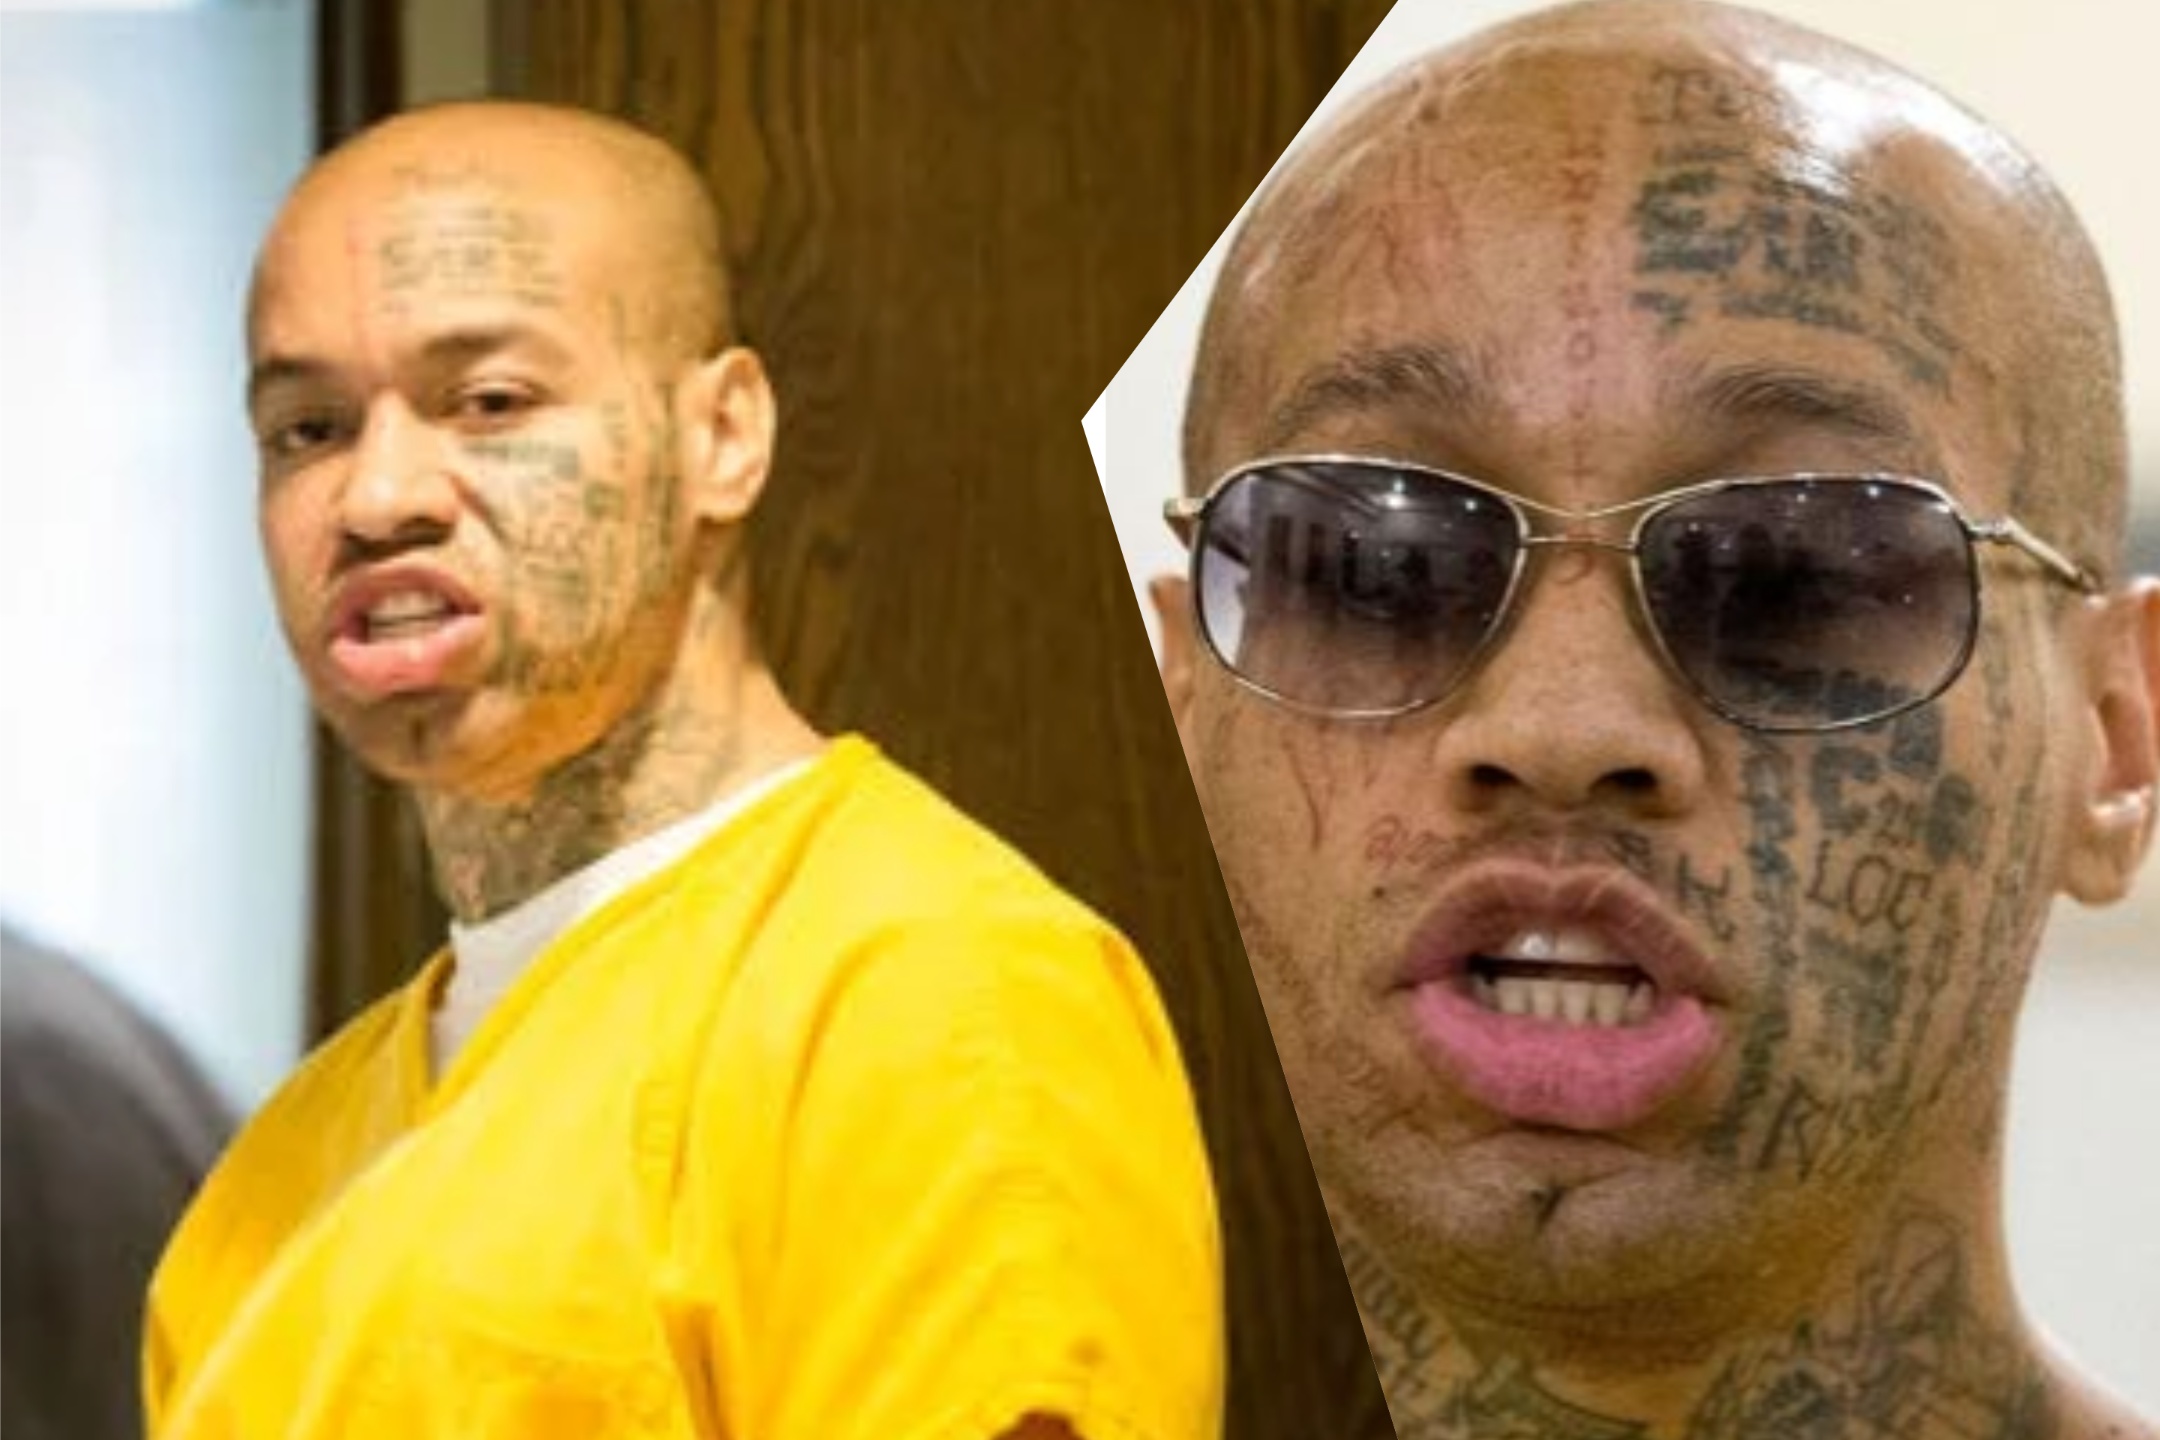 Who is Nikko Jenkins? Age, wife, sister: where is he now and what did he do?